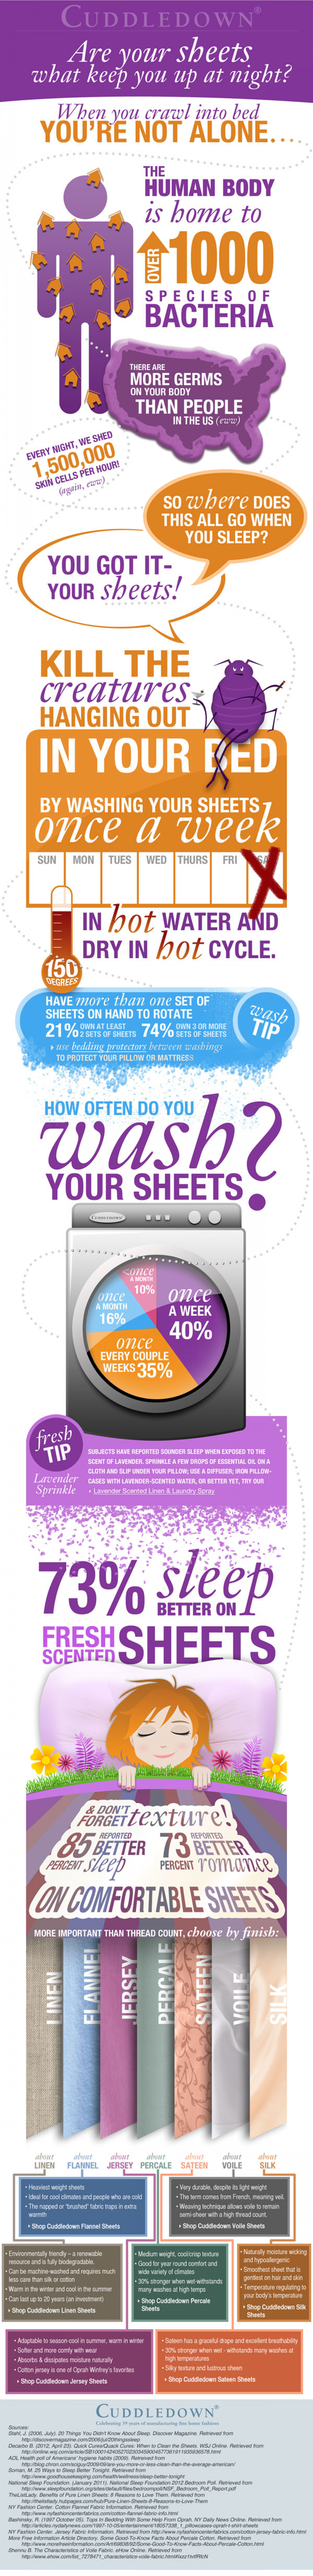 Are your sheets what keep you up at night? Infographic